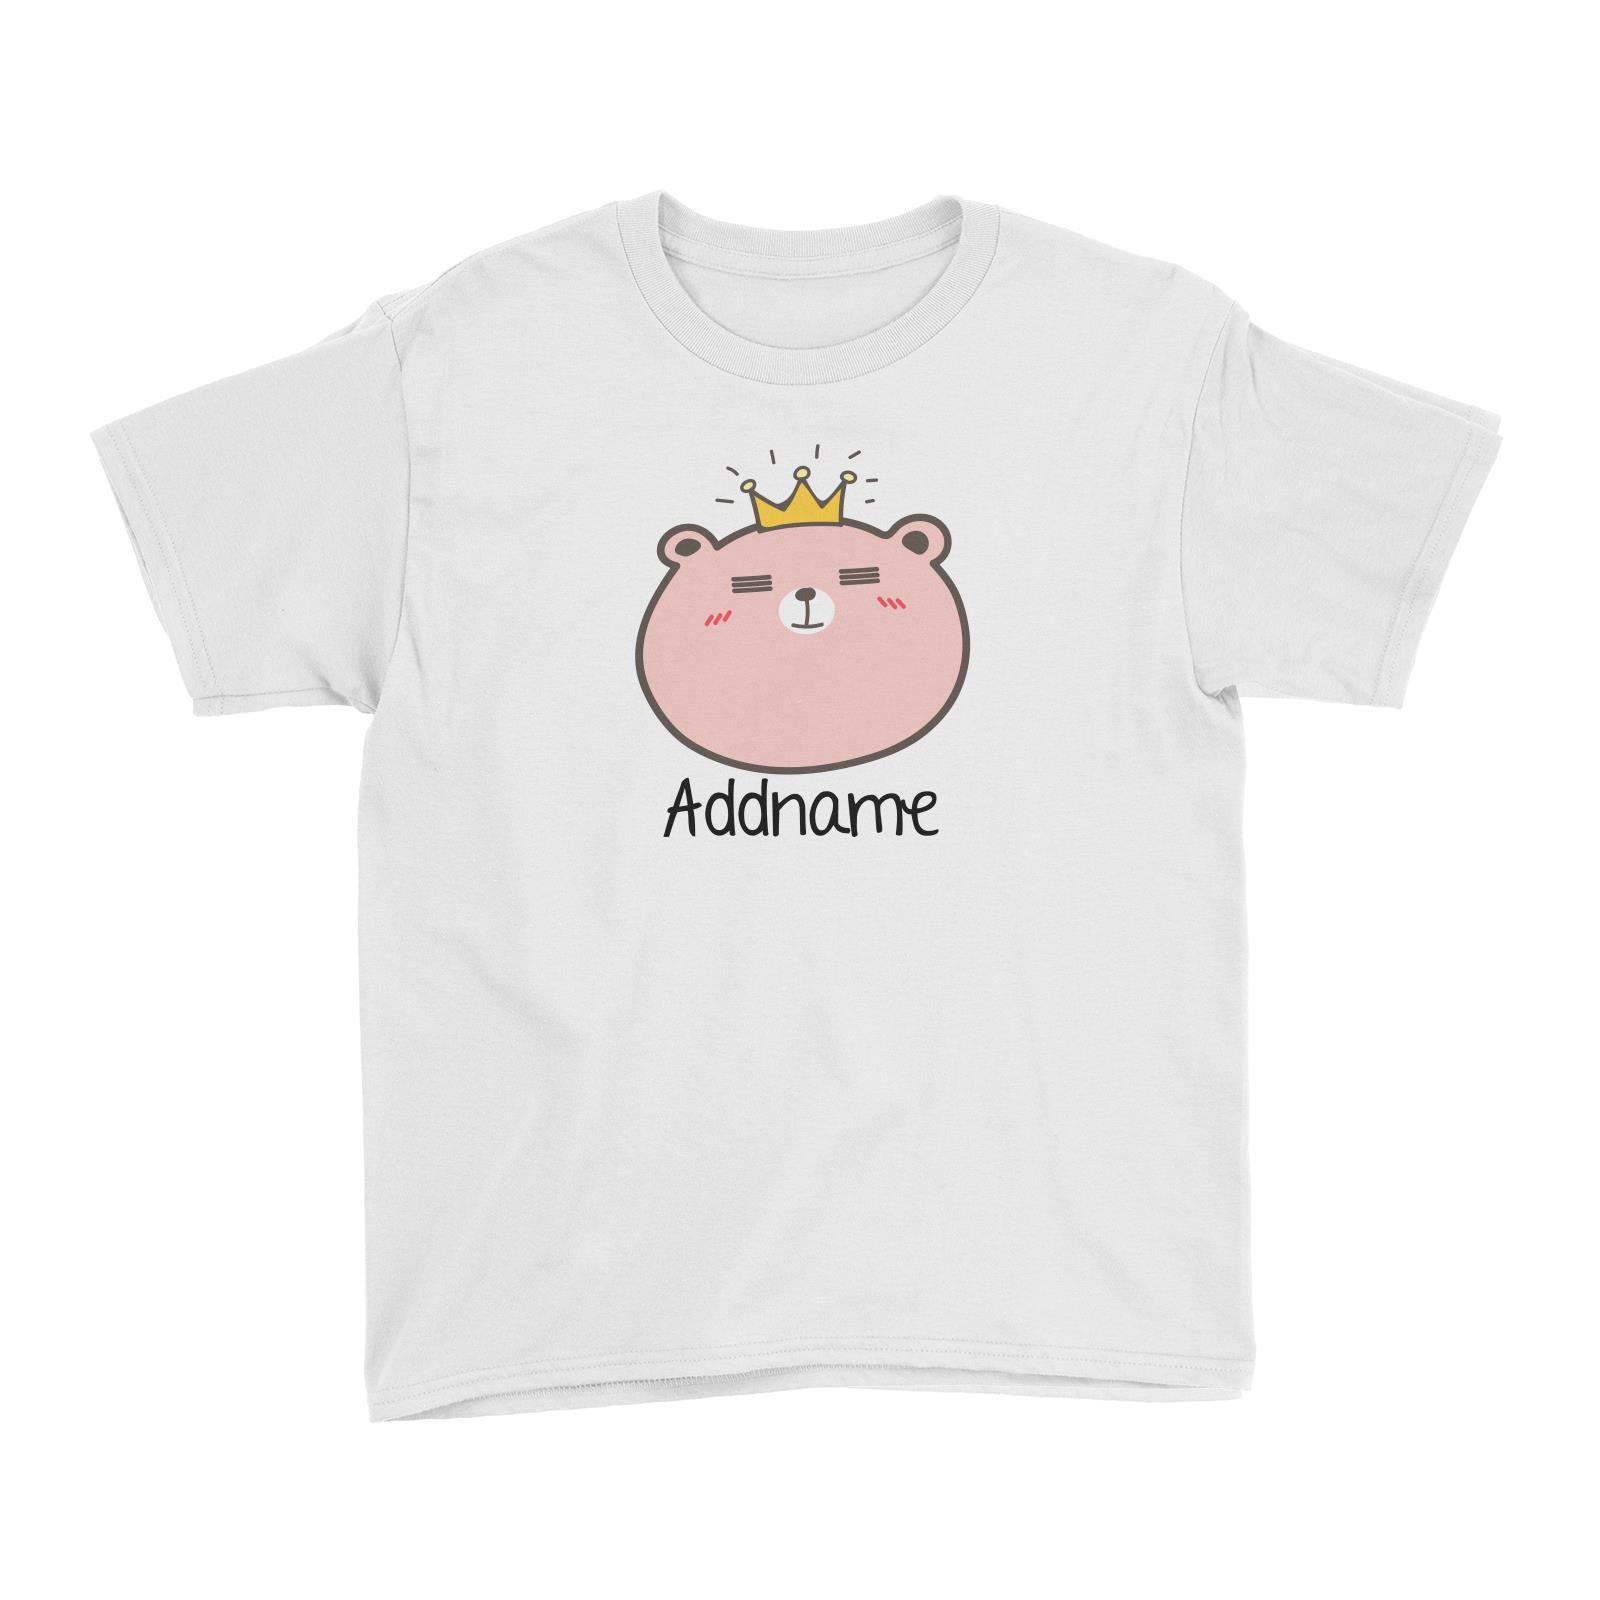 Cute Animals And Friends Series Cute Pink Bear With Crown Addname Kid's T-Shirt